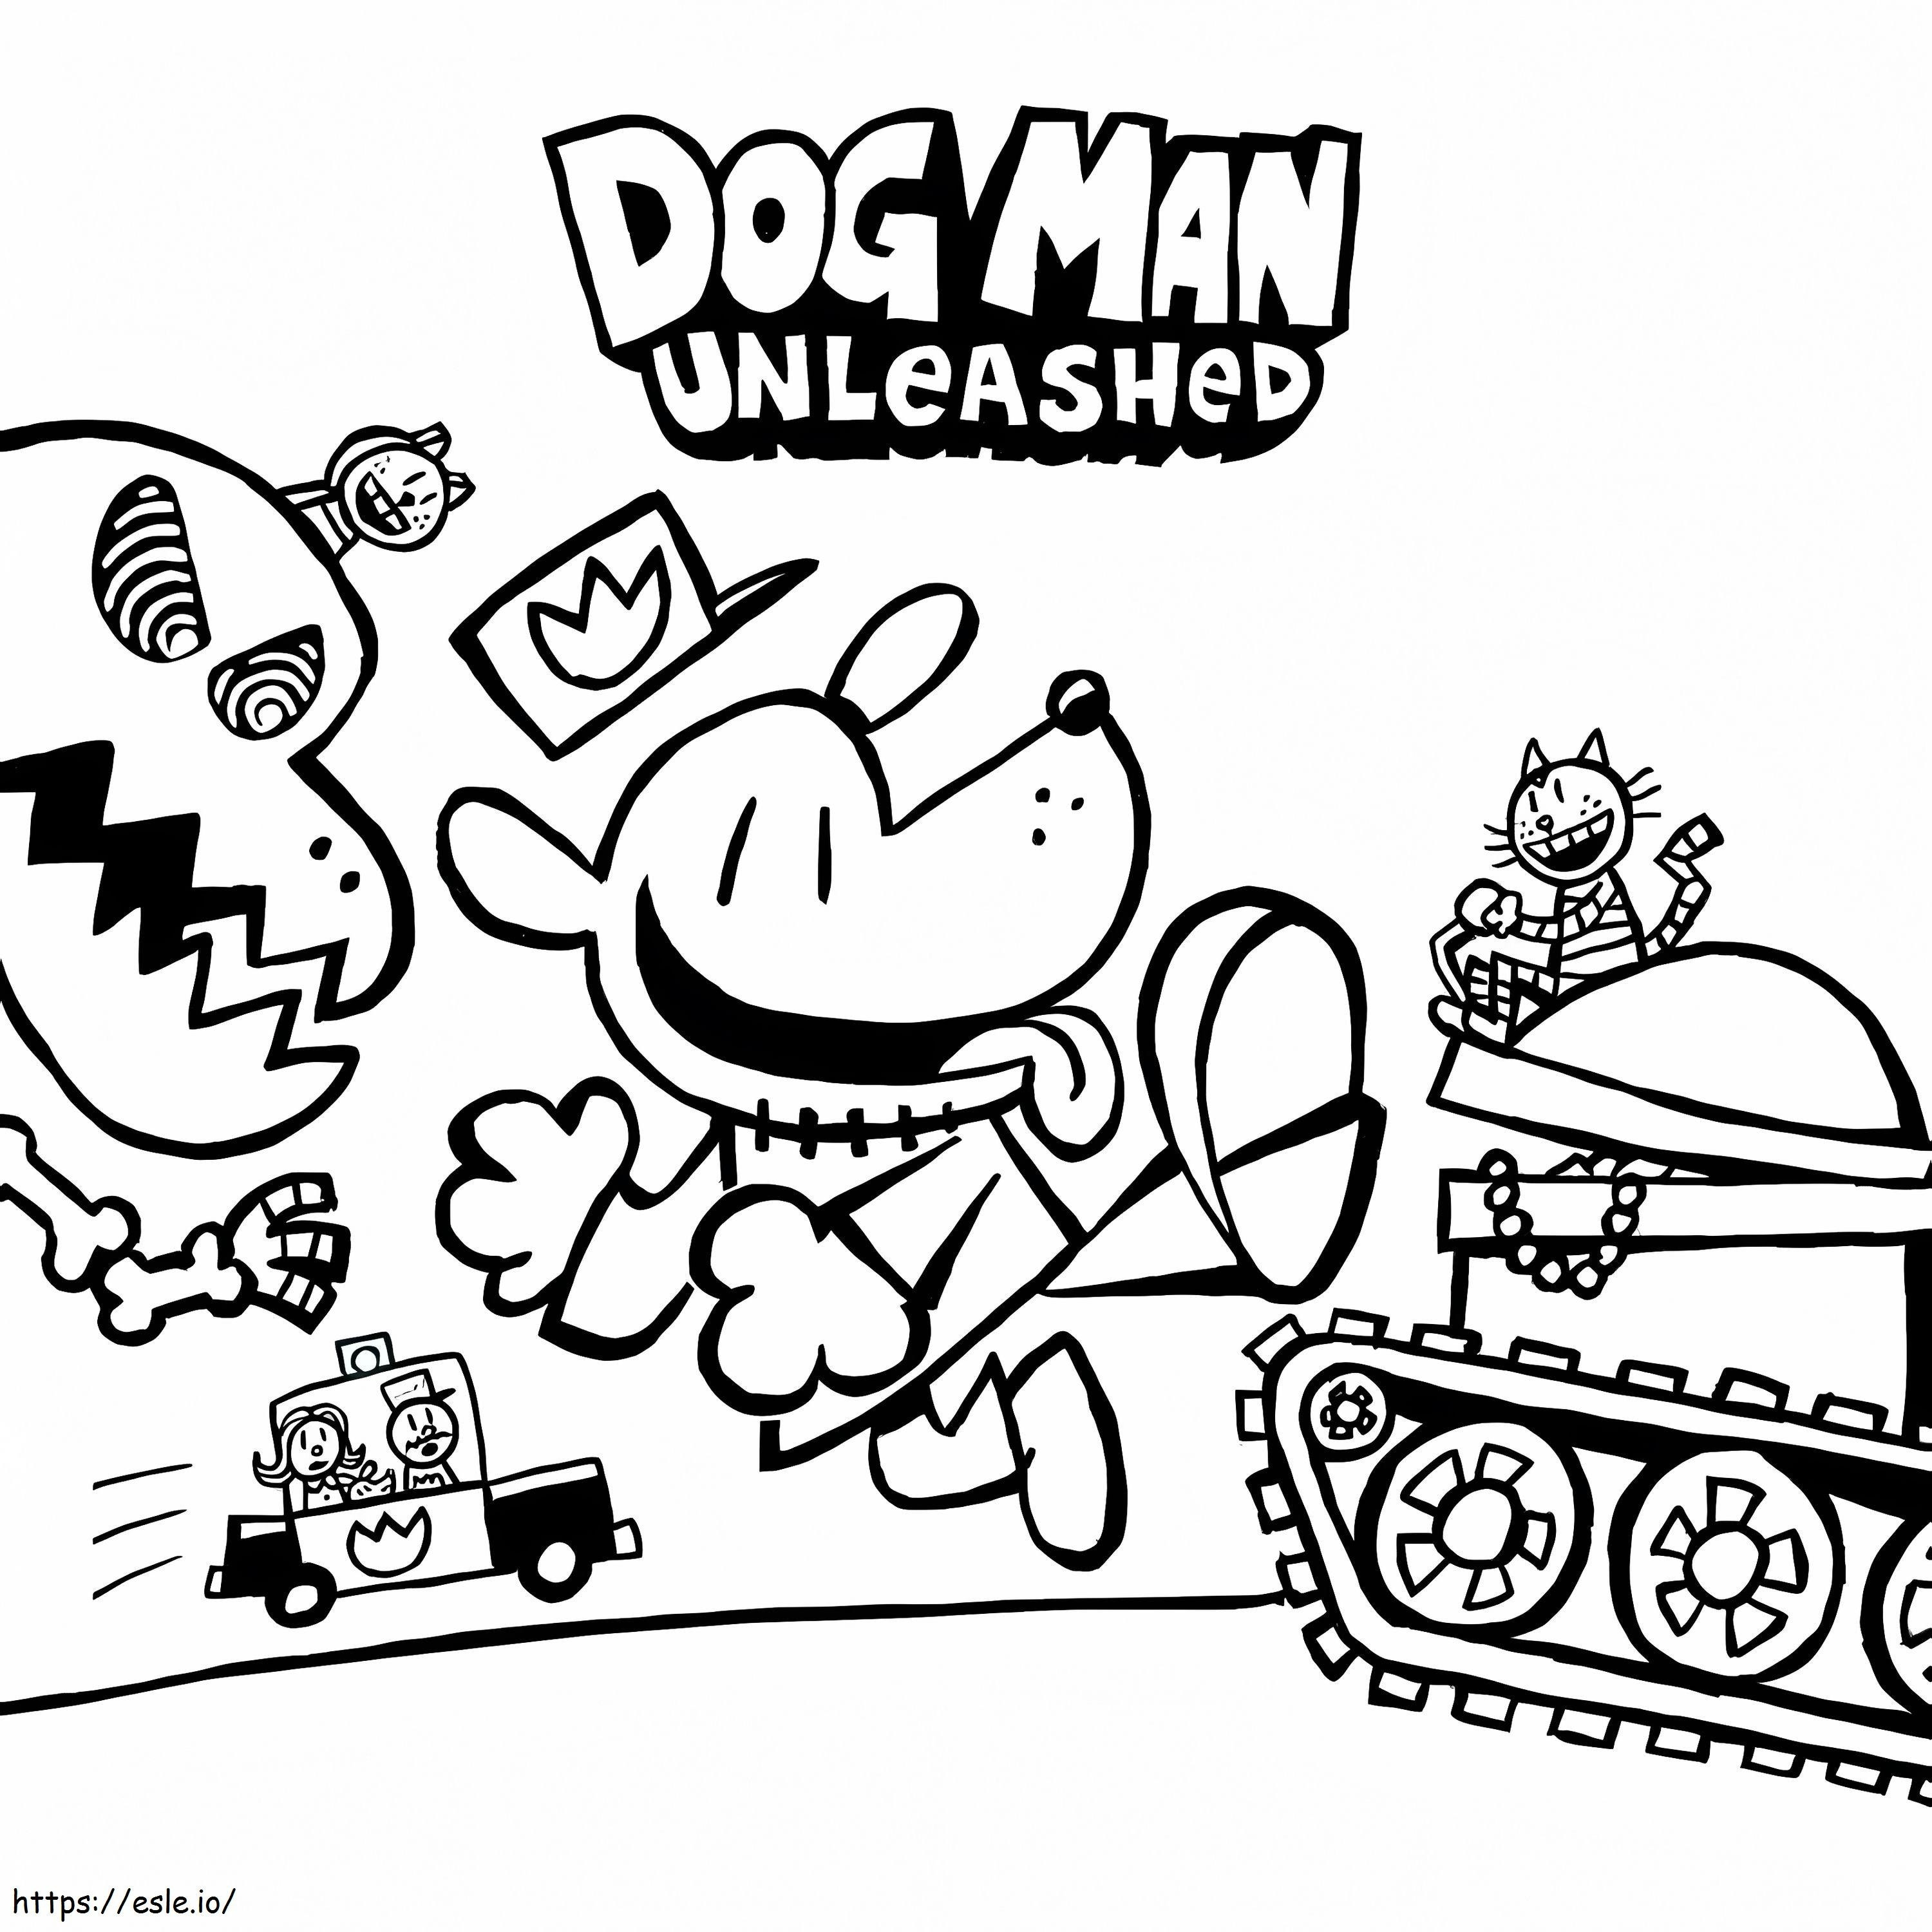 Dog Man Unleashed coloring page